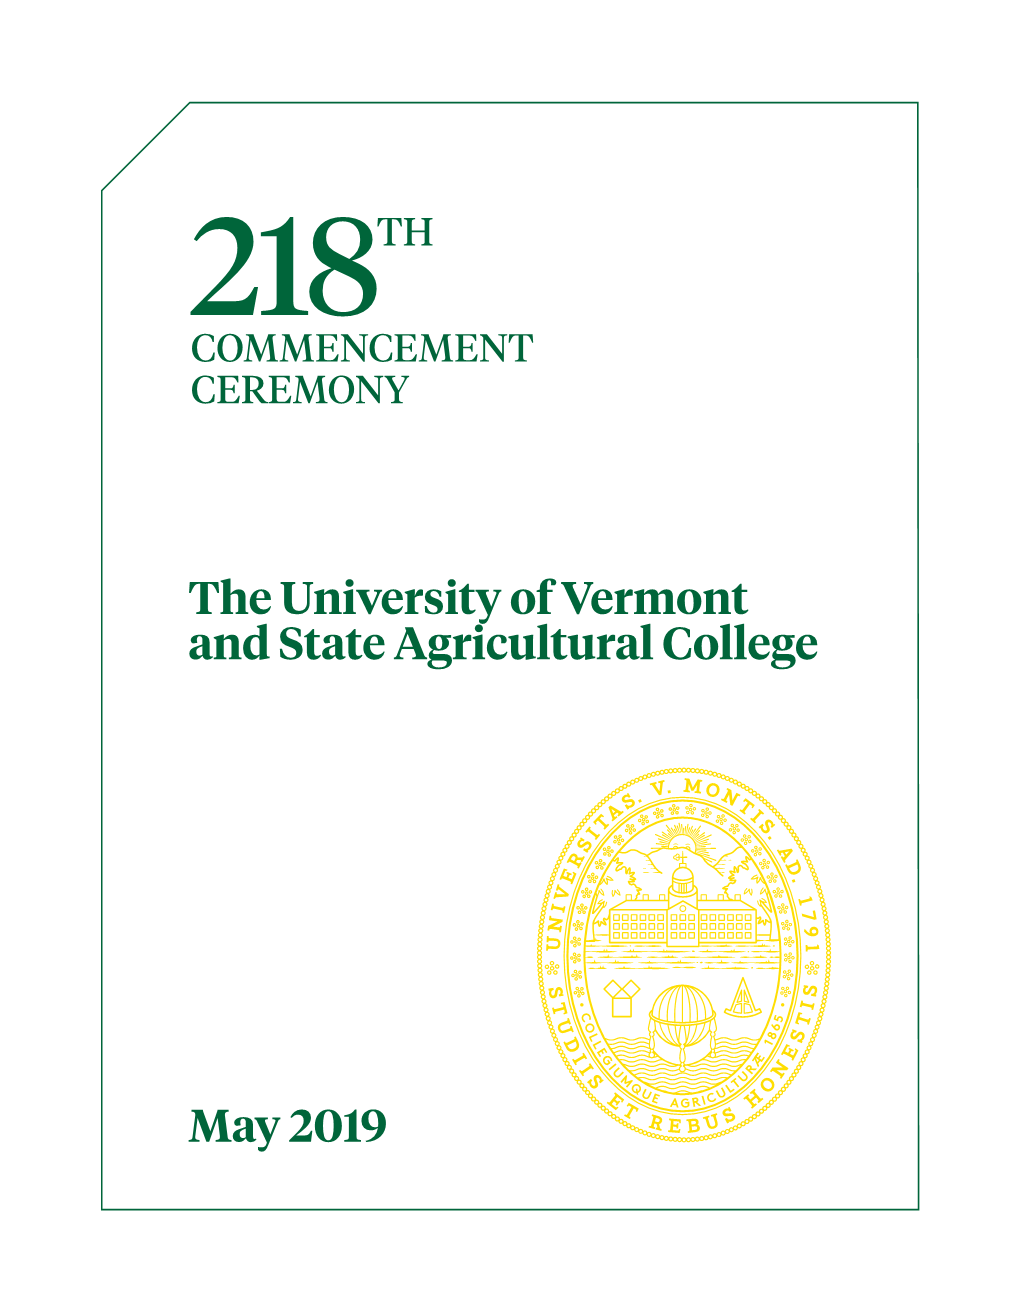 The University of Vermont and State Agricultural College May 2019